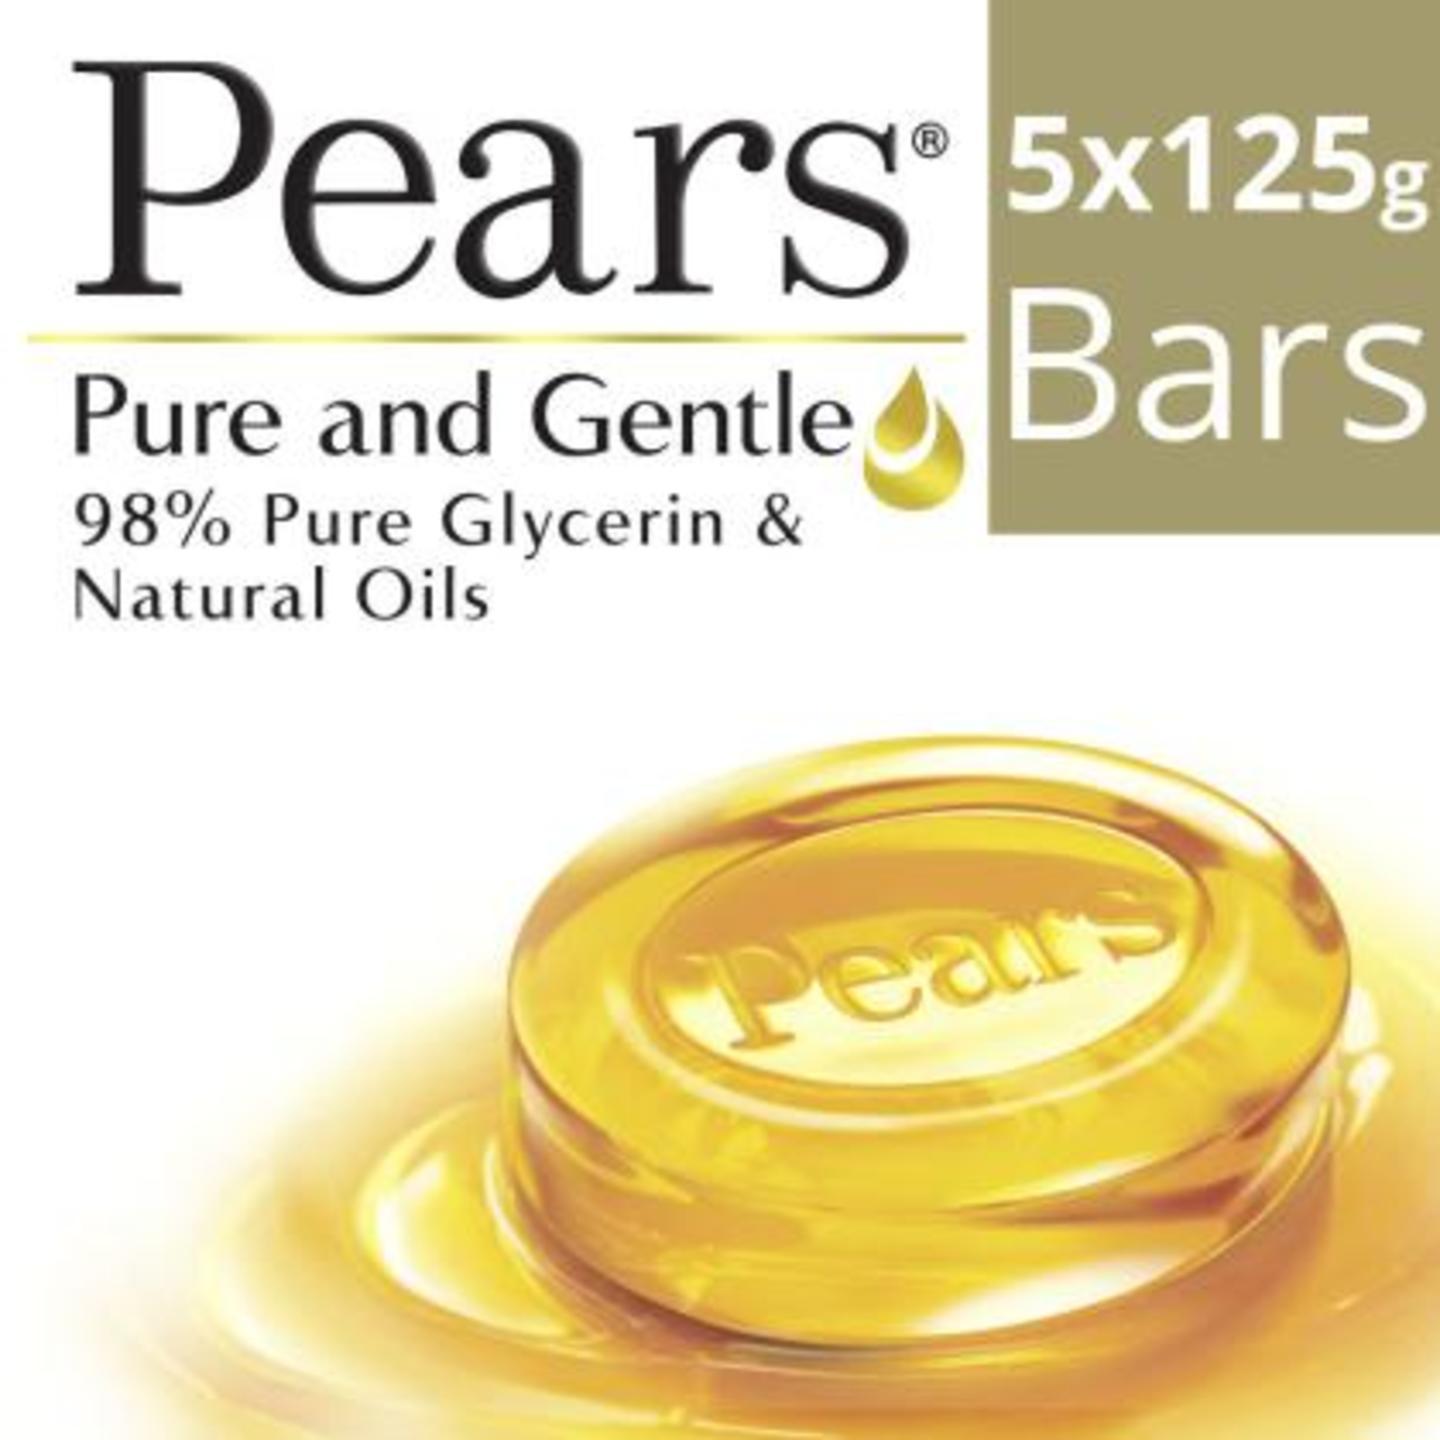 Pears Pure & Gentle Soap 125 g Buy 4 Get 1 Free